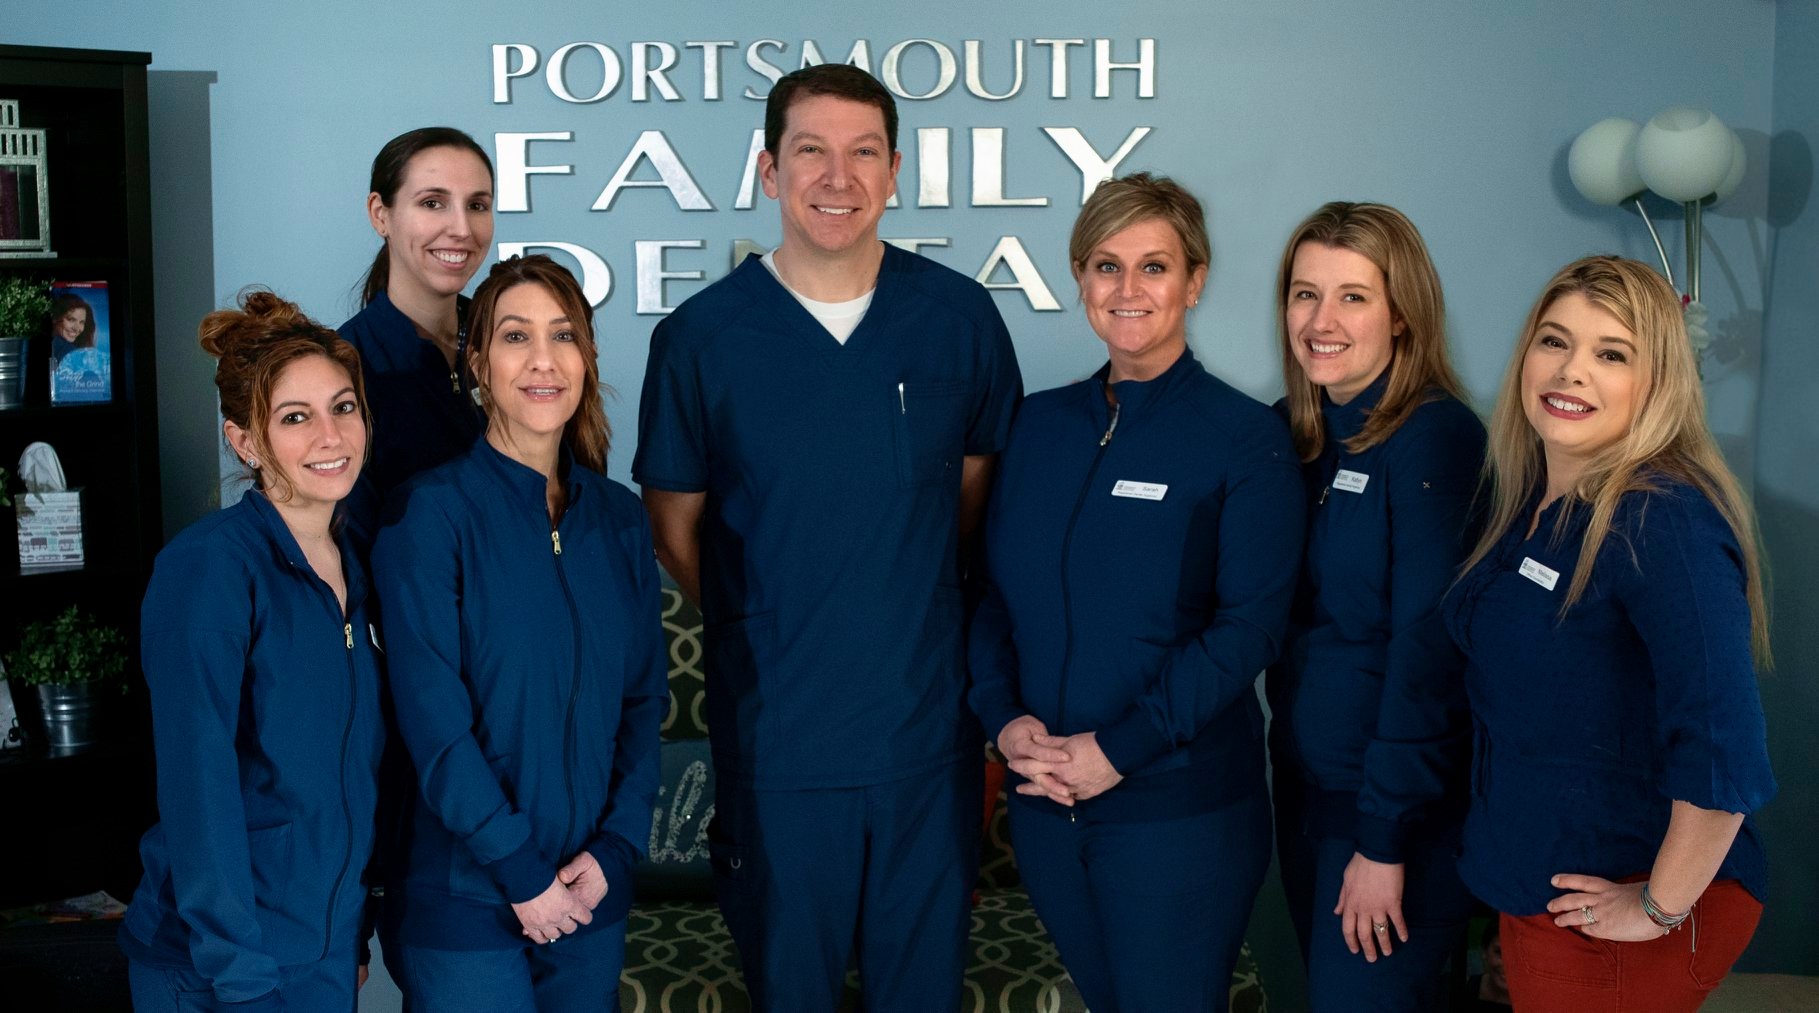 Portsmouth Family Dental 209 Clock Tower Square, Portsmouth Rhode Island 02871